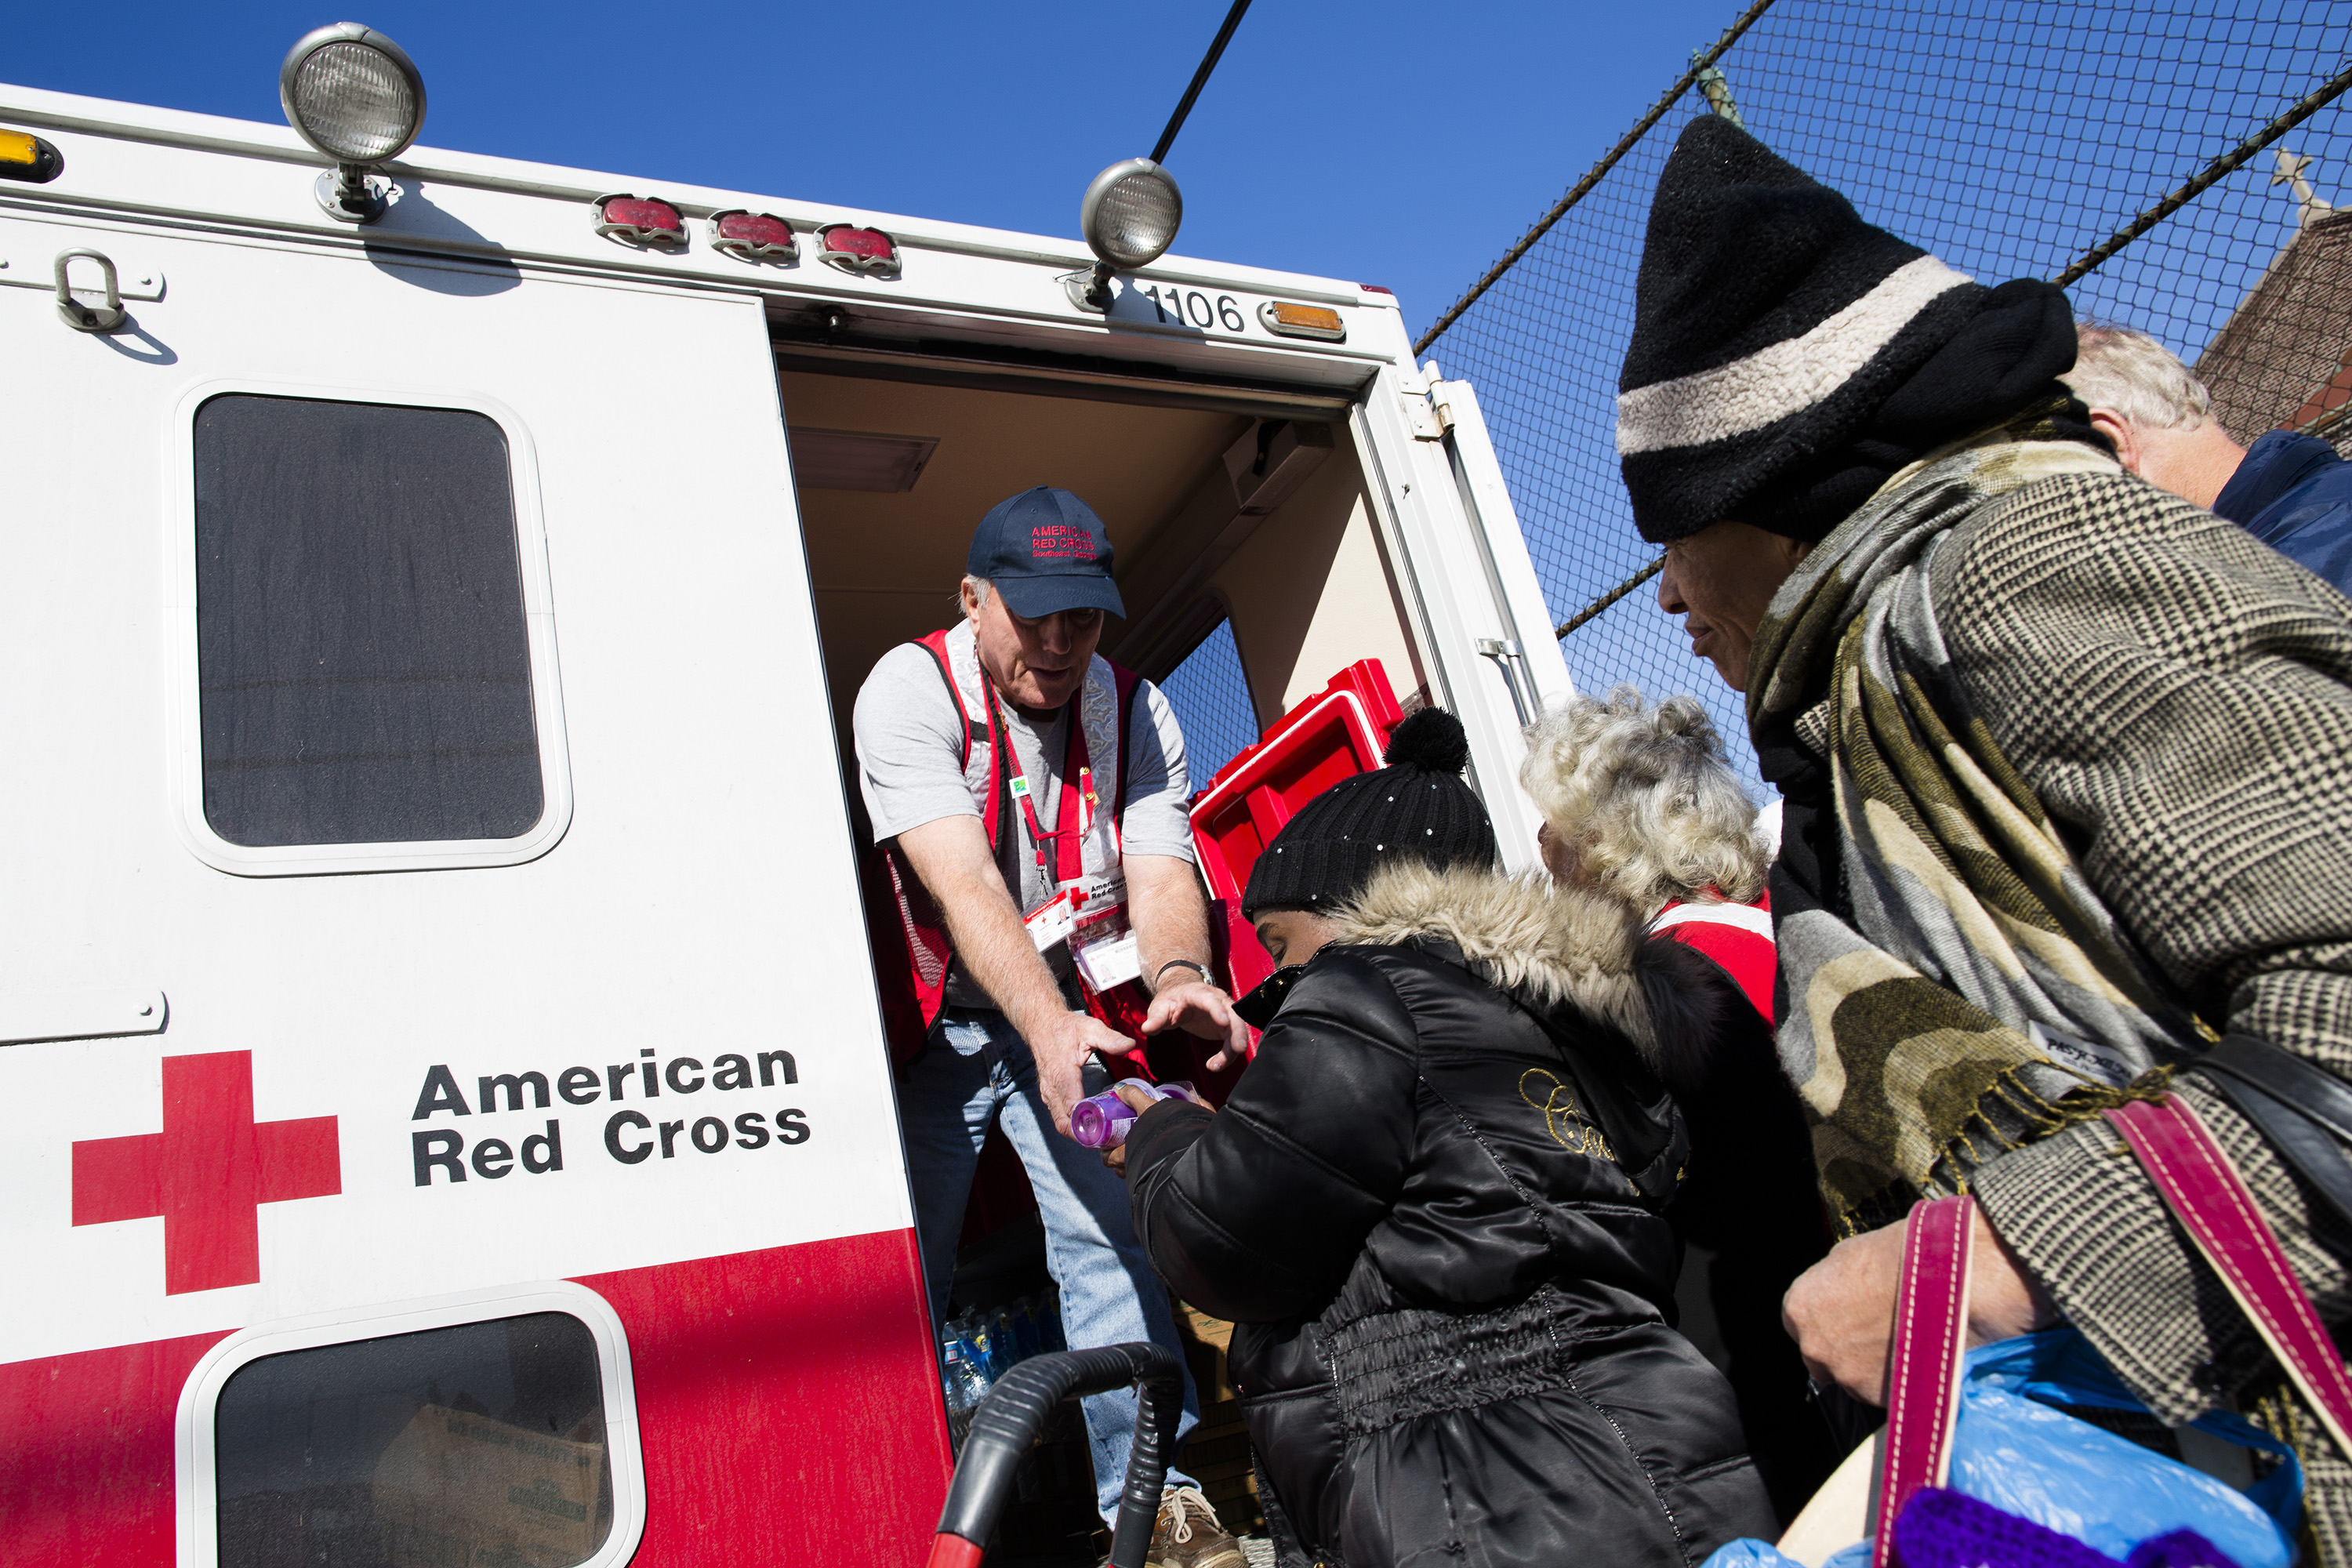 FILE - In this Friday, Nov. 9, 2012 file photo, a member of the American Red Cross distributes food to residents of Coney Island affected by Superstorm Sandy in the Brooklyn borough of New York. A year after receiving huge sums to respond to Superstorm Sandy, the American Red Cross experienced a 32 percent drop in charitable donations in 2014. It fell from ninth to 21st place among the nation's best-supported nonprofits _ its lowest ranking since The Chronicle of Philanthropy began an annual survey in 1991. (AP Photo/John Minchillo)